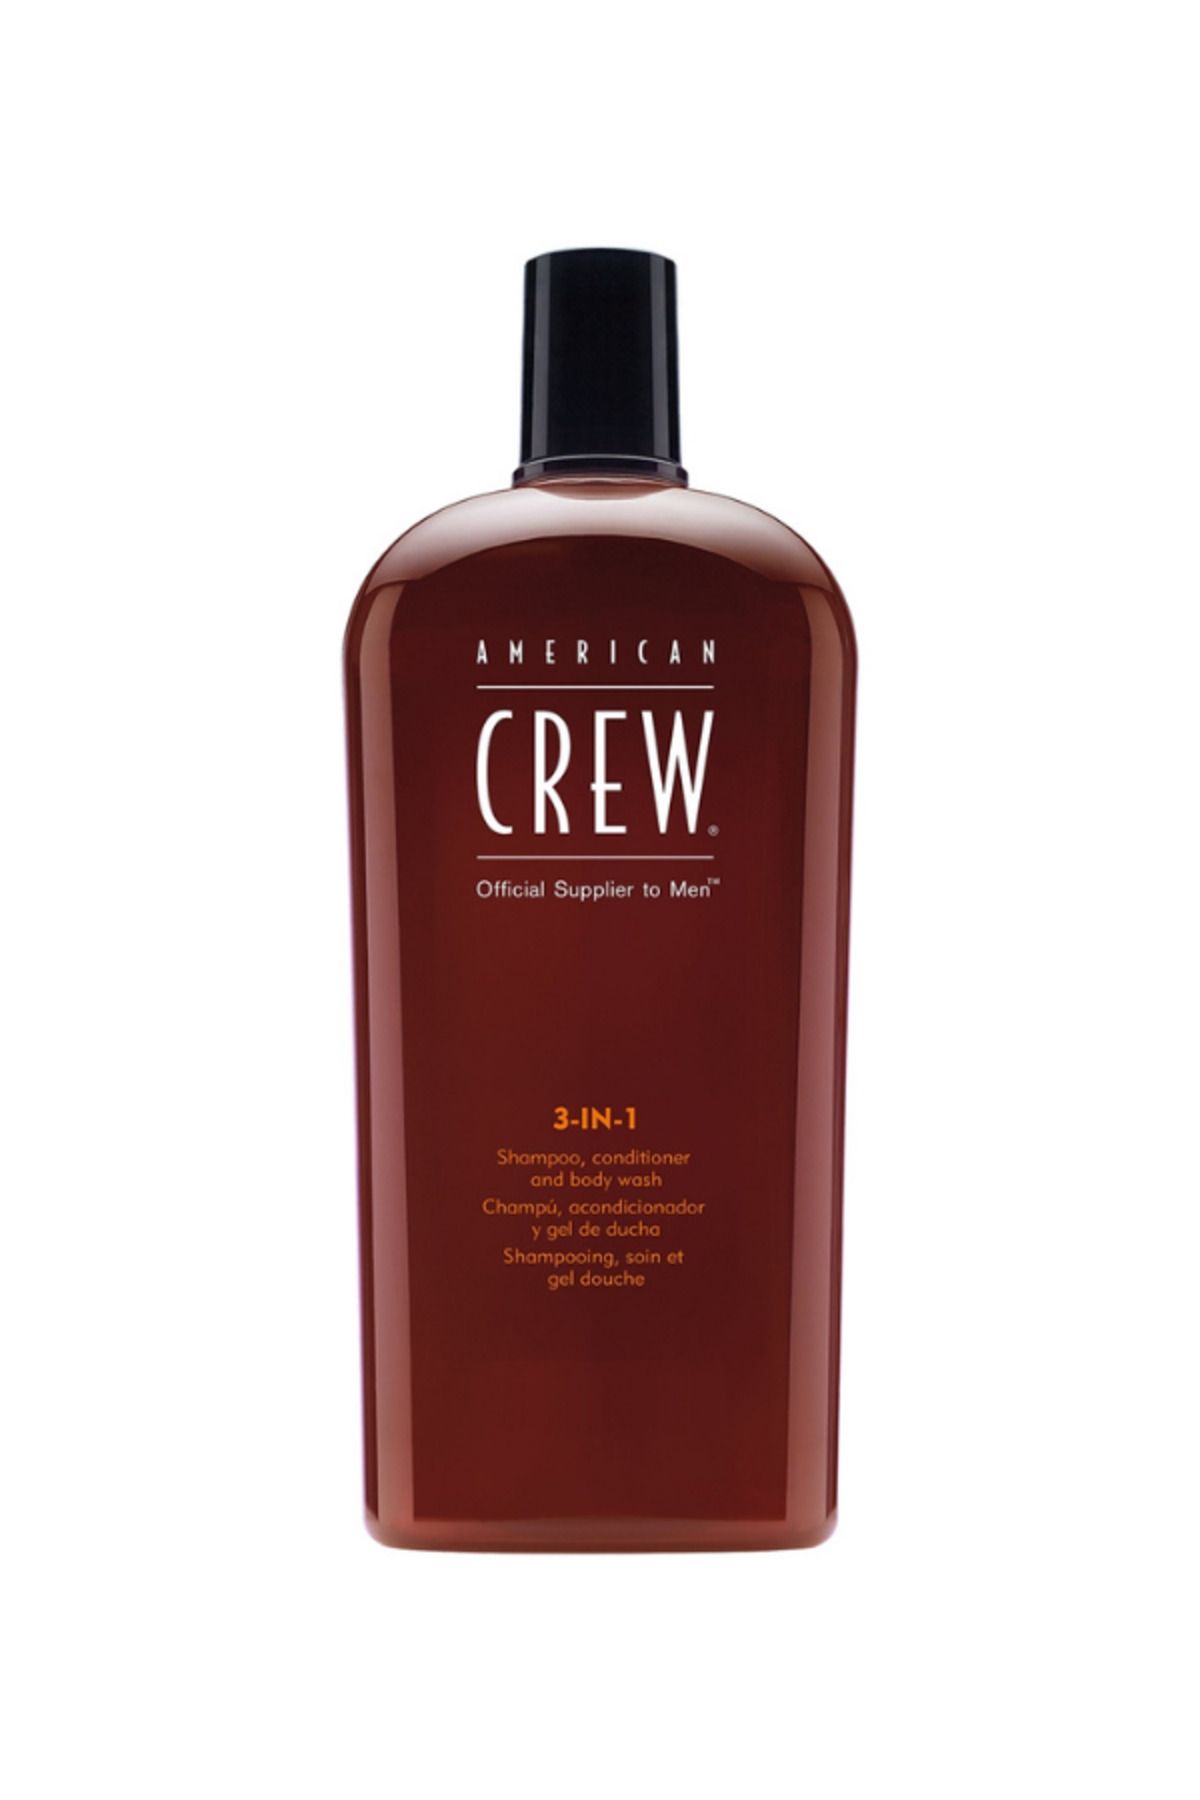 American Crew 3 İN 1 SHAMPOO FOR MEN 250 ML (SHAMPOO, CONDİTİONER AND BODY WASH) DKHAİR246